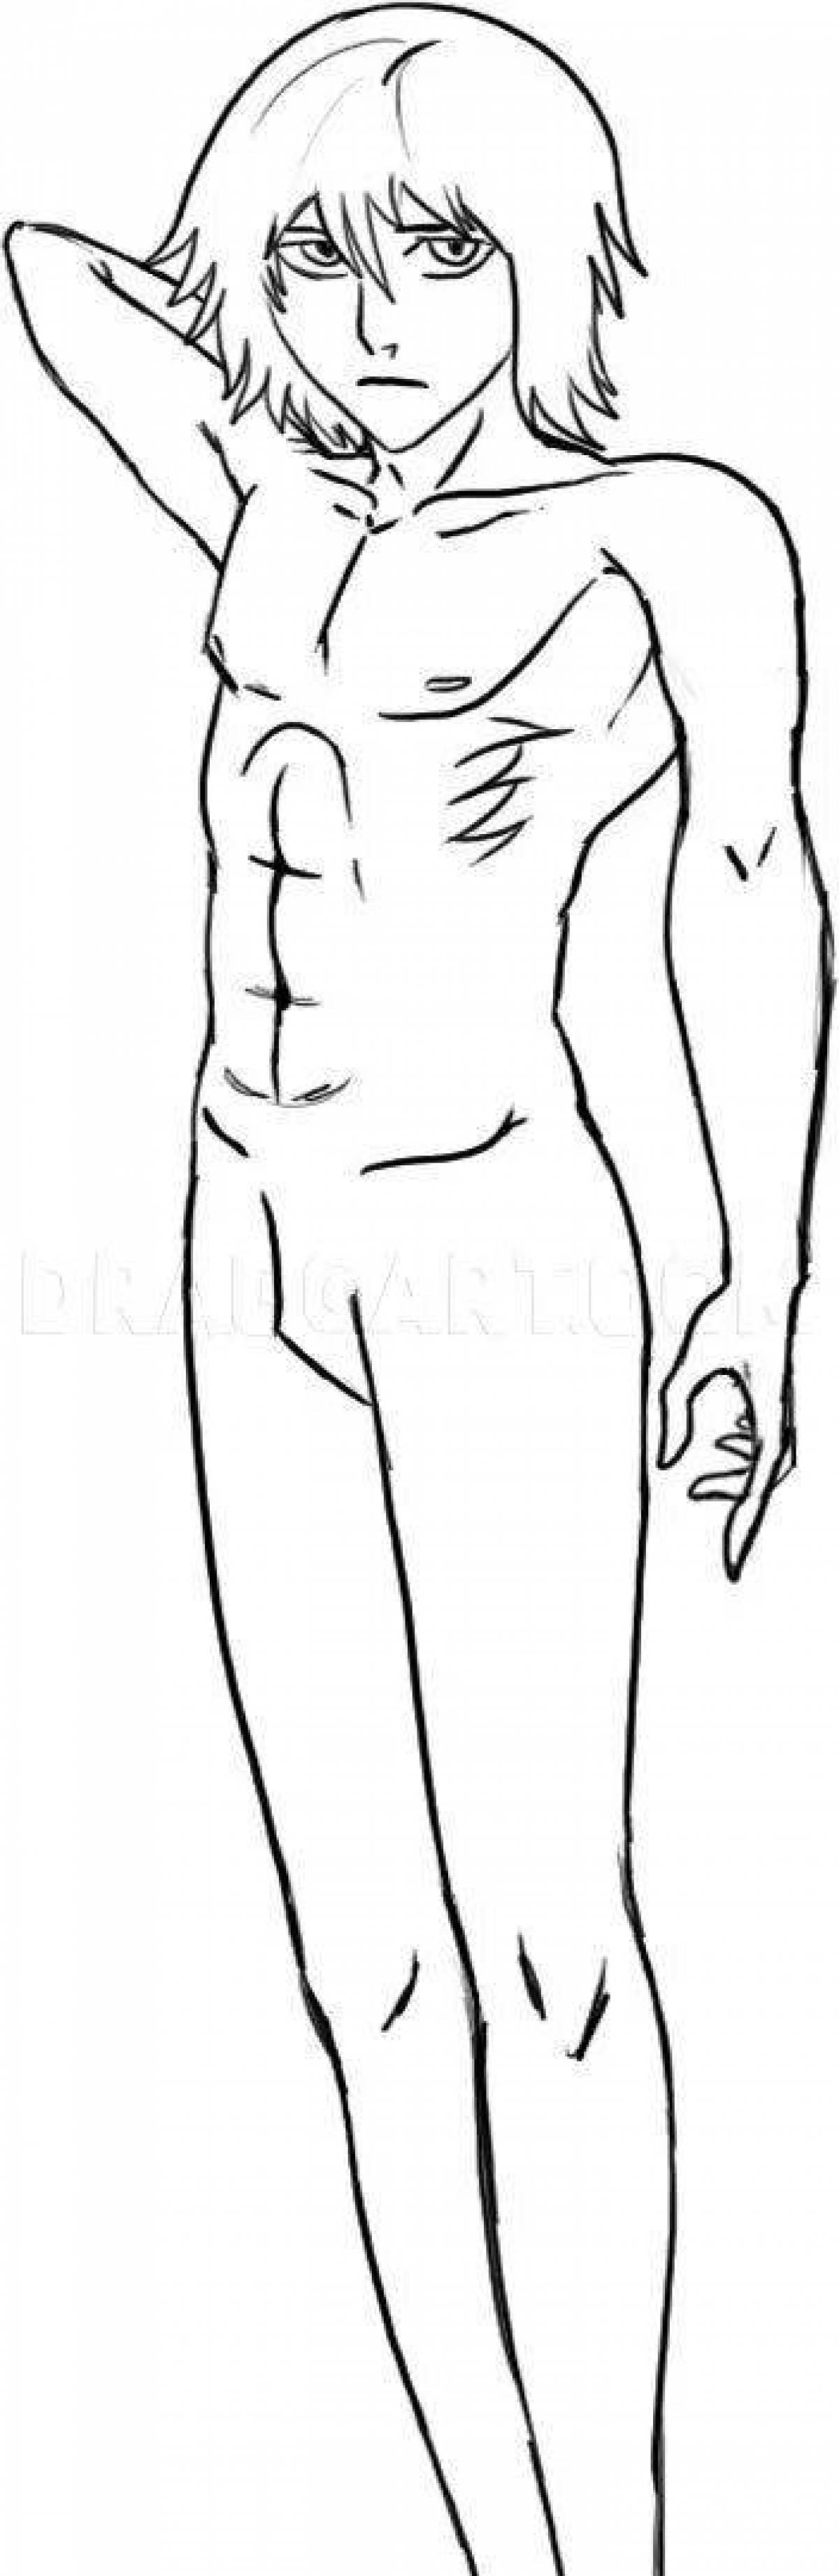 Bright anime body coloring page